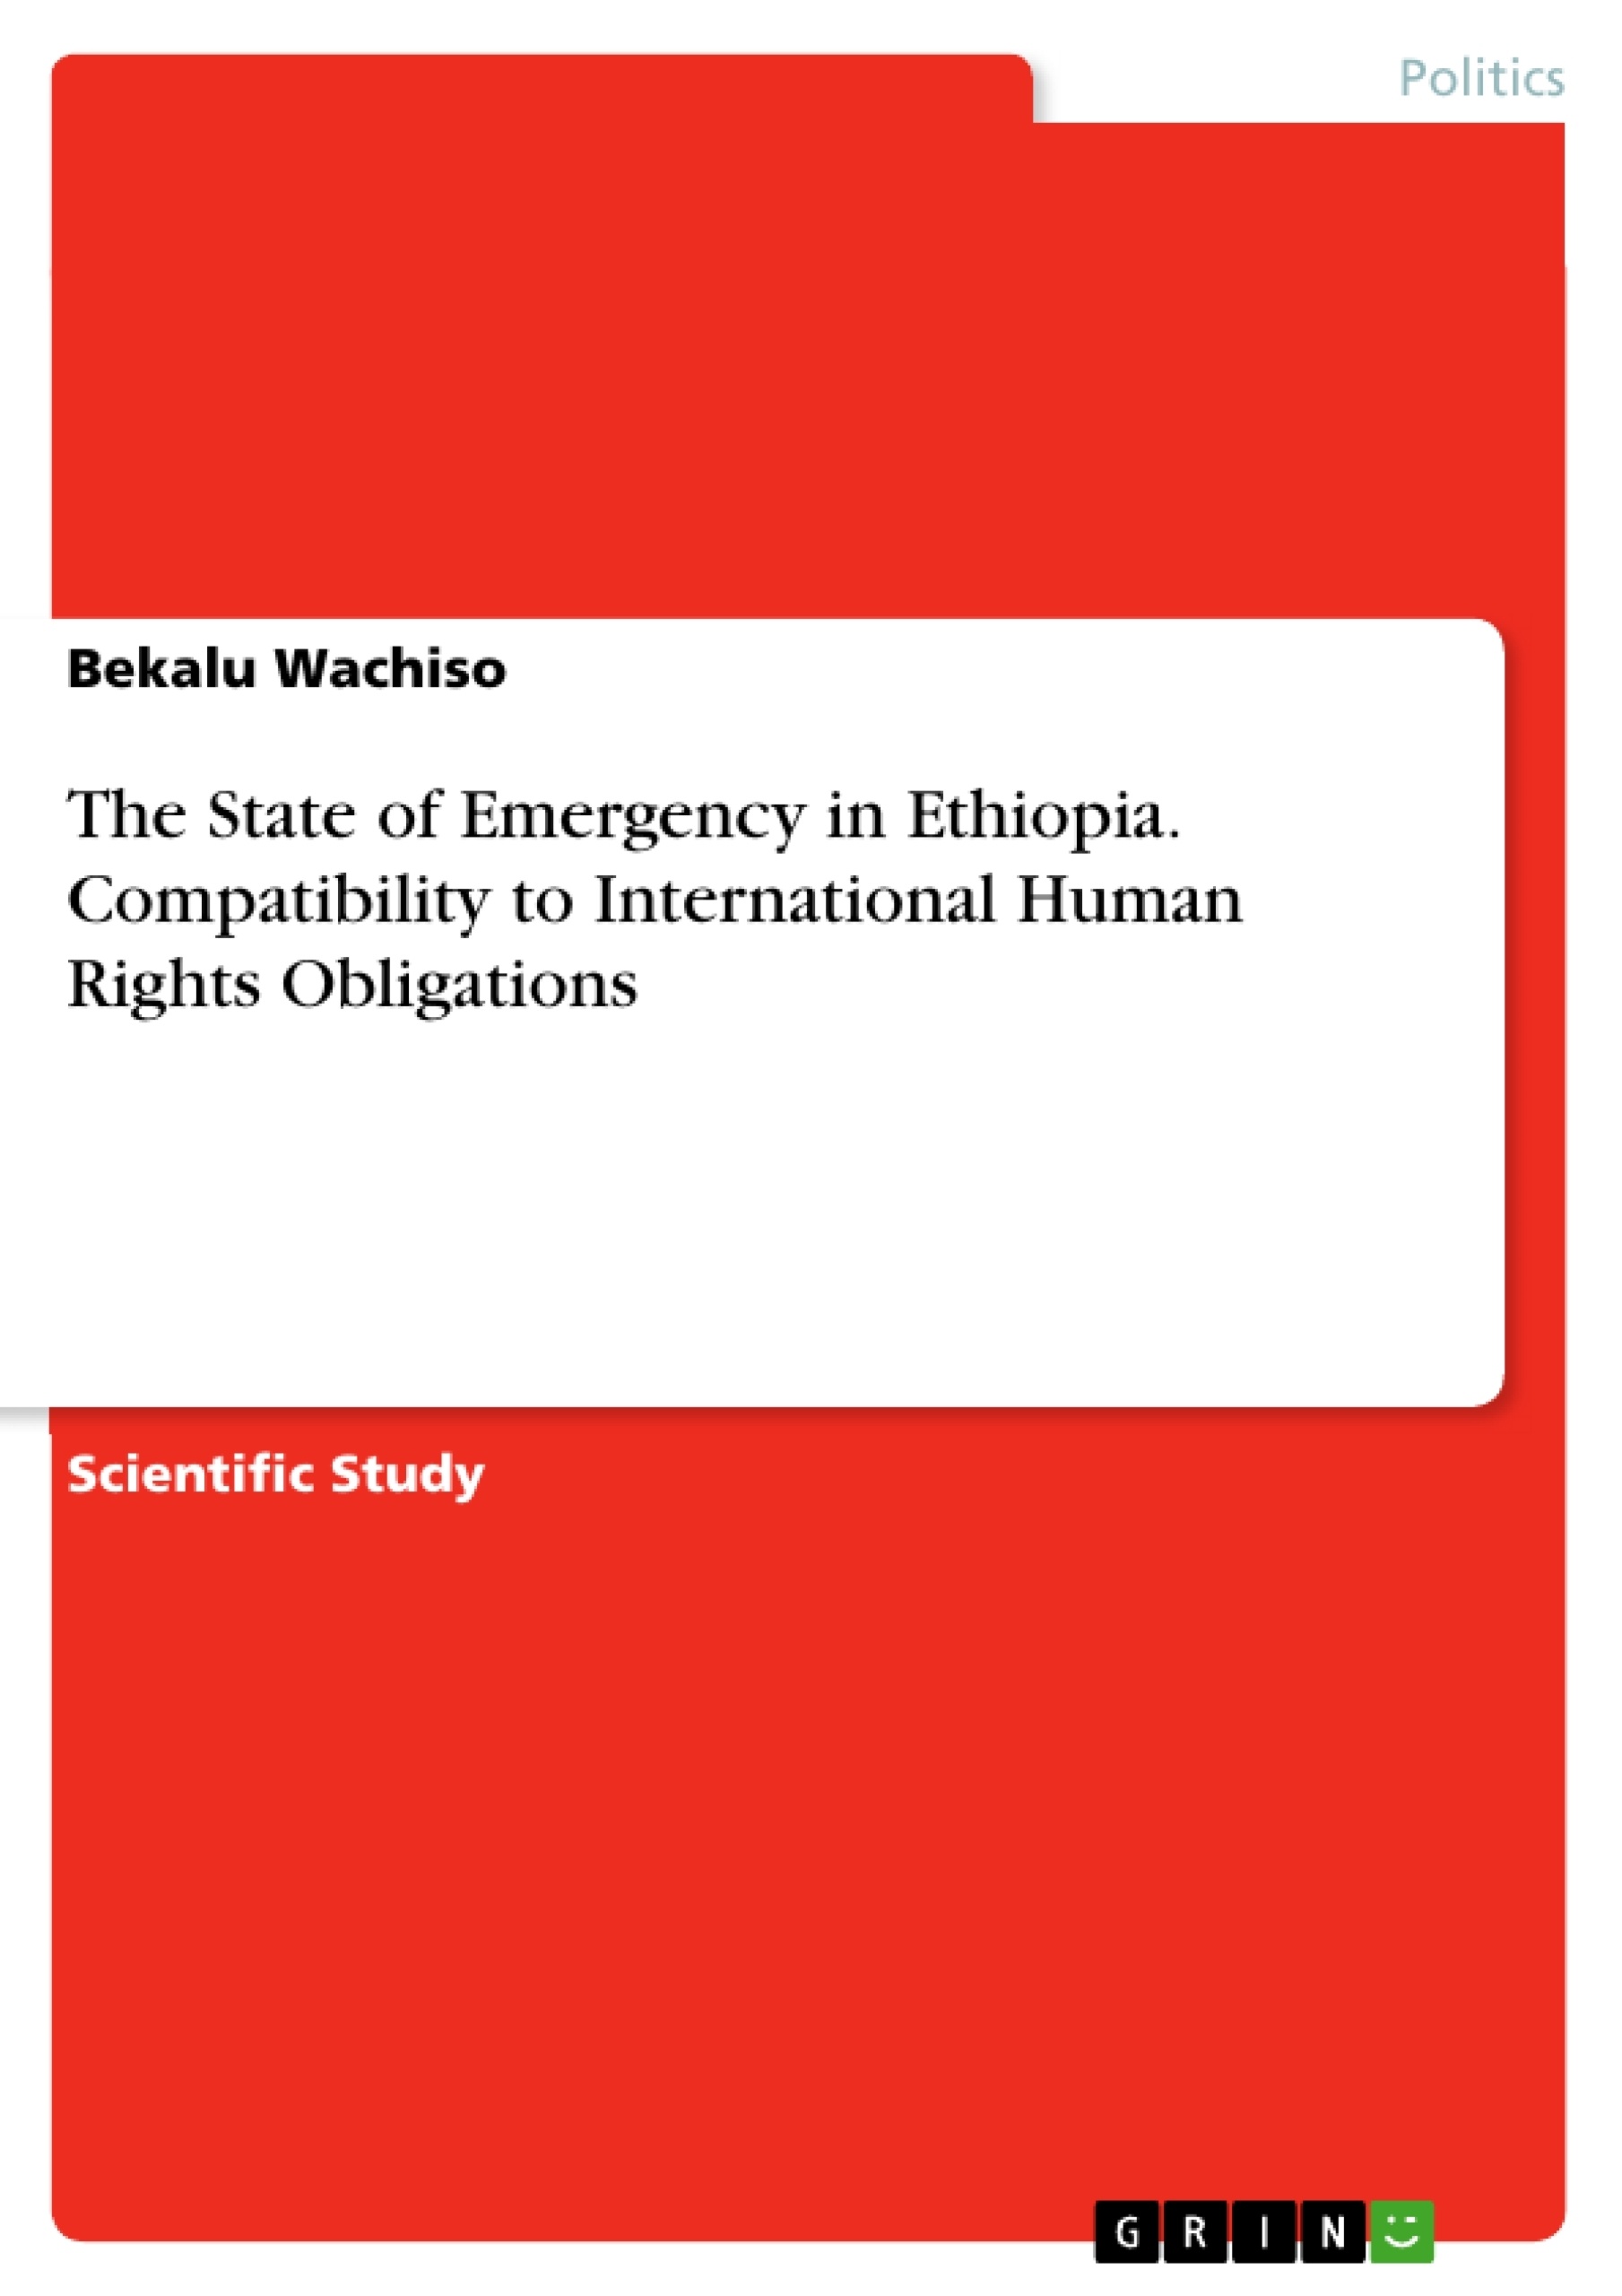 Titel: The State of Emergency in Ethiopia. Compatibility to International Human Rights Obligations